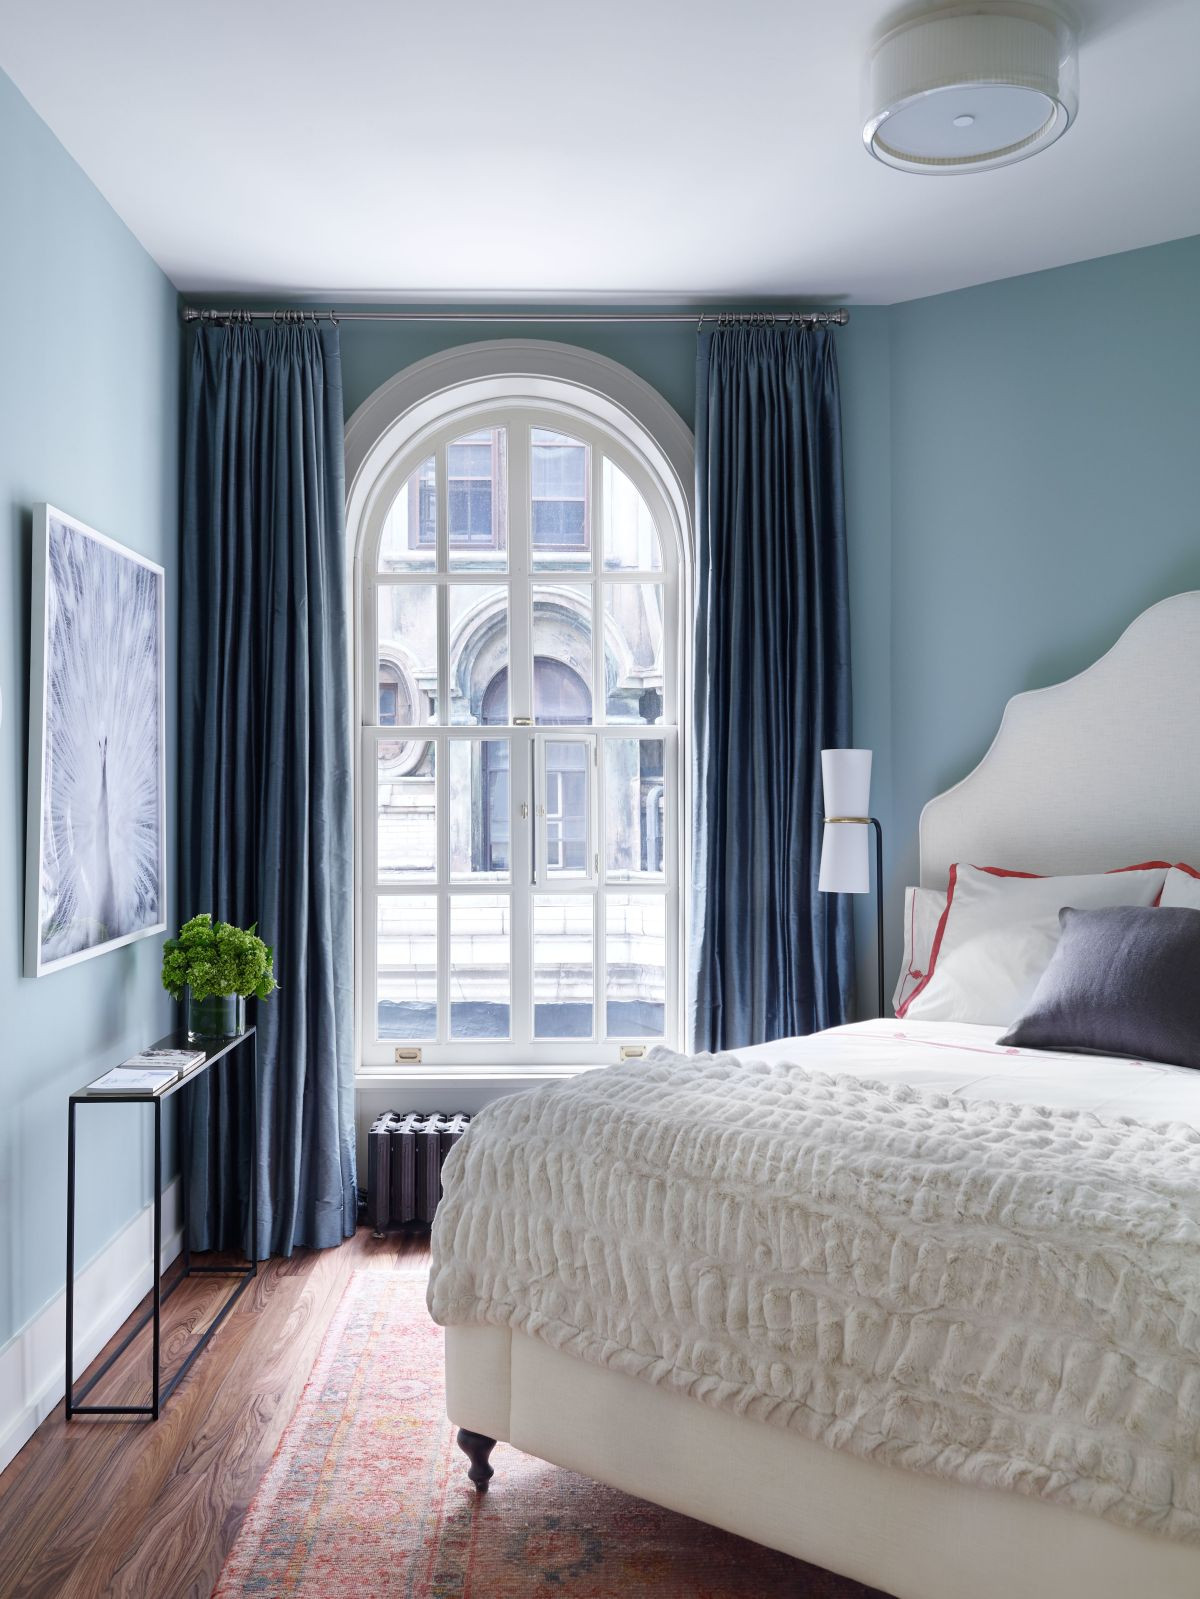 Colors To Paint Bedroom
 The Four Best Paint Colors For Bedrooms